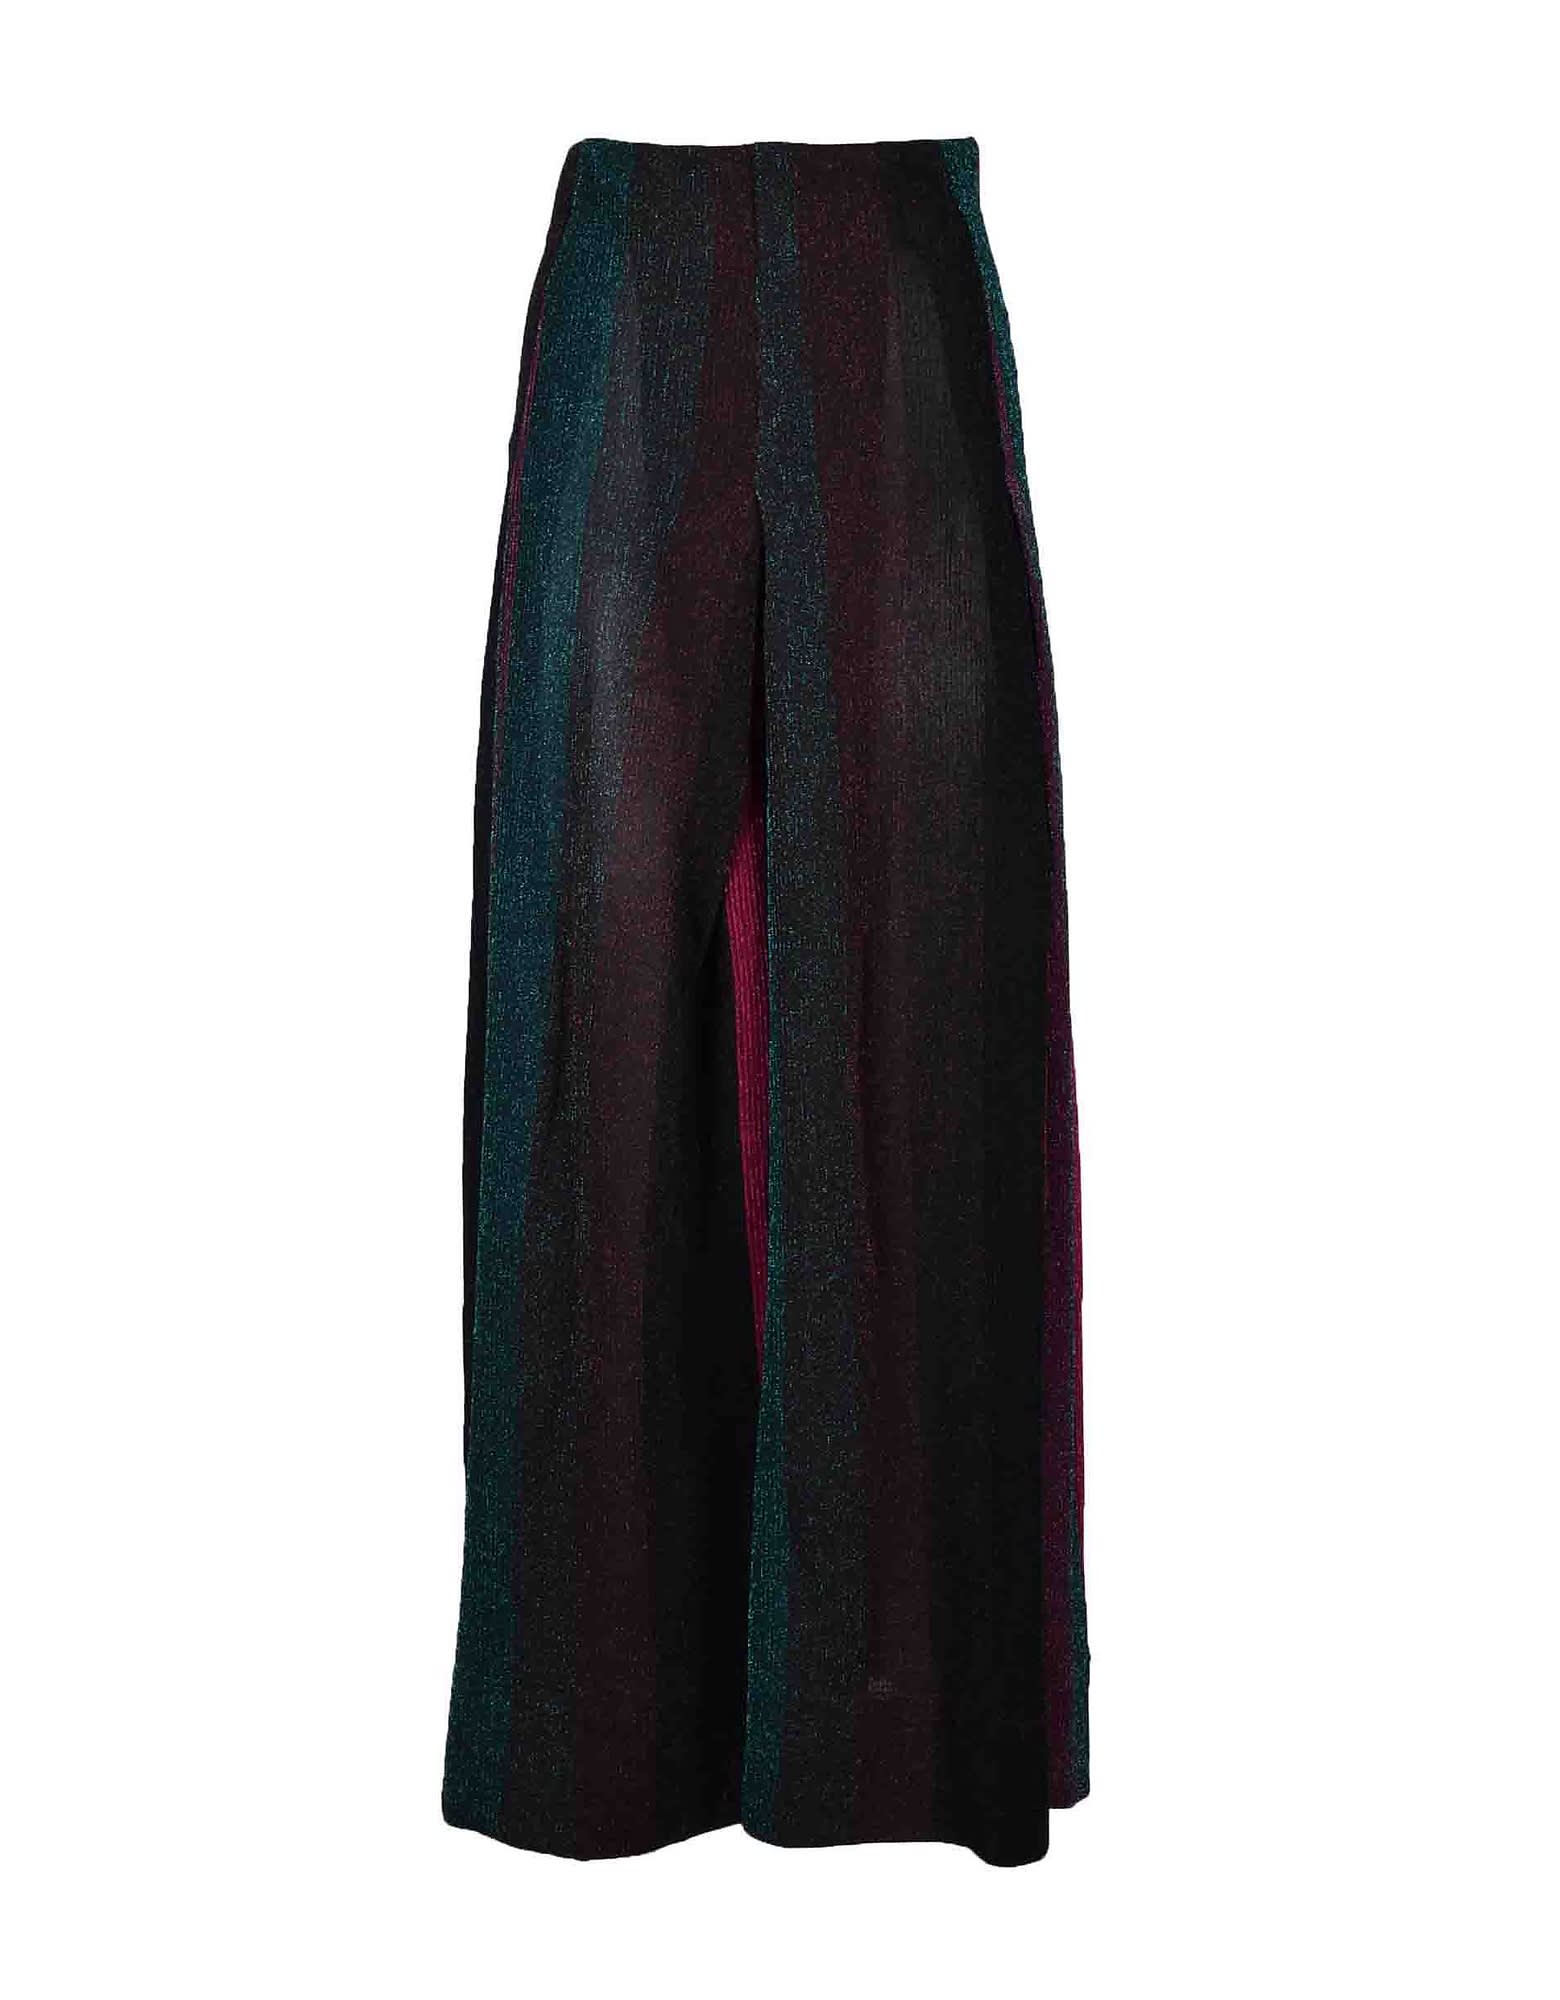 Circus Hotel Womens Multicolor Skirt